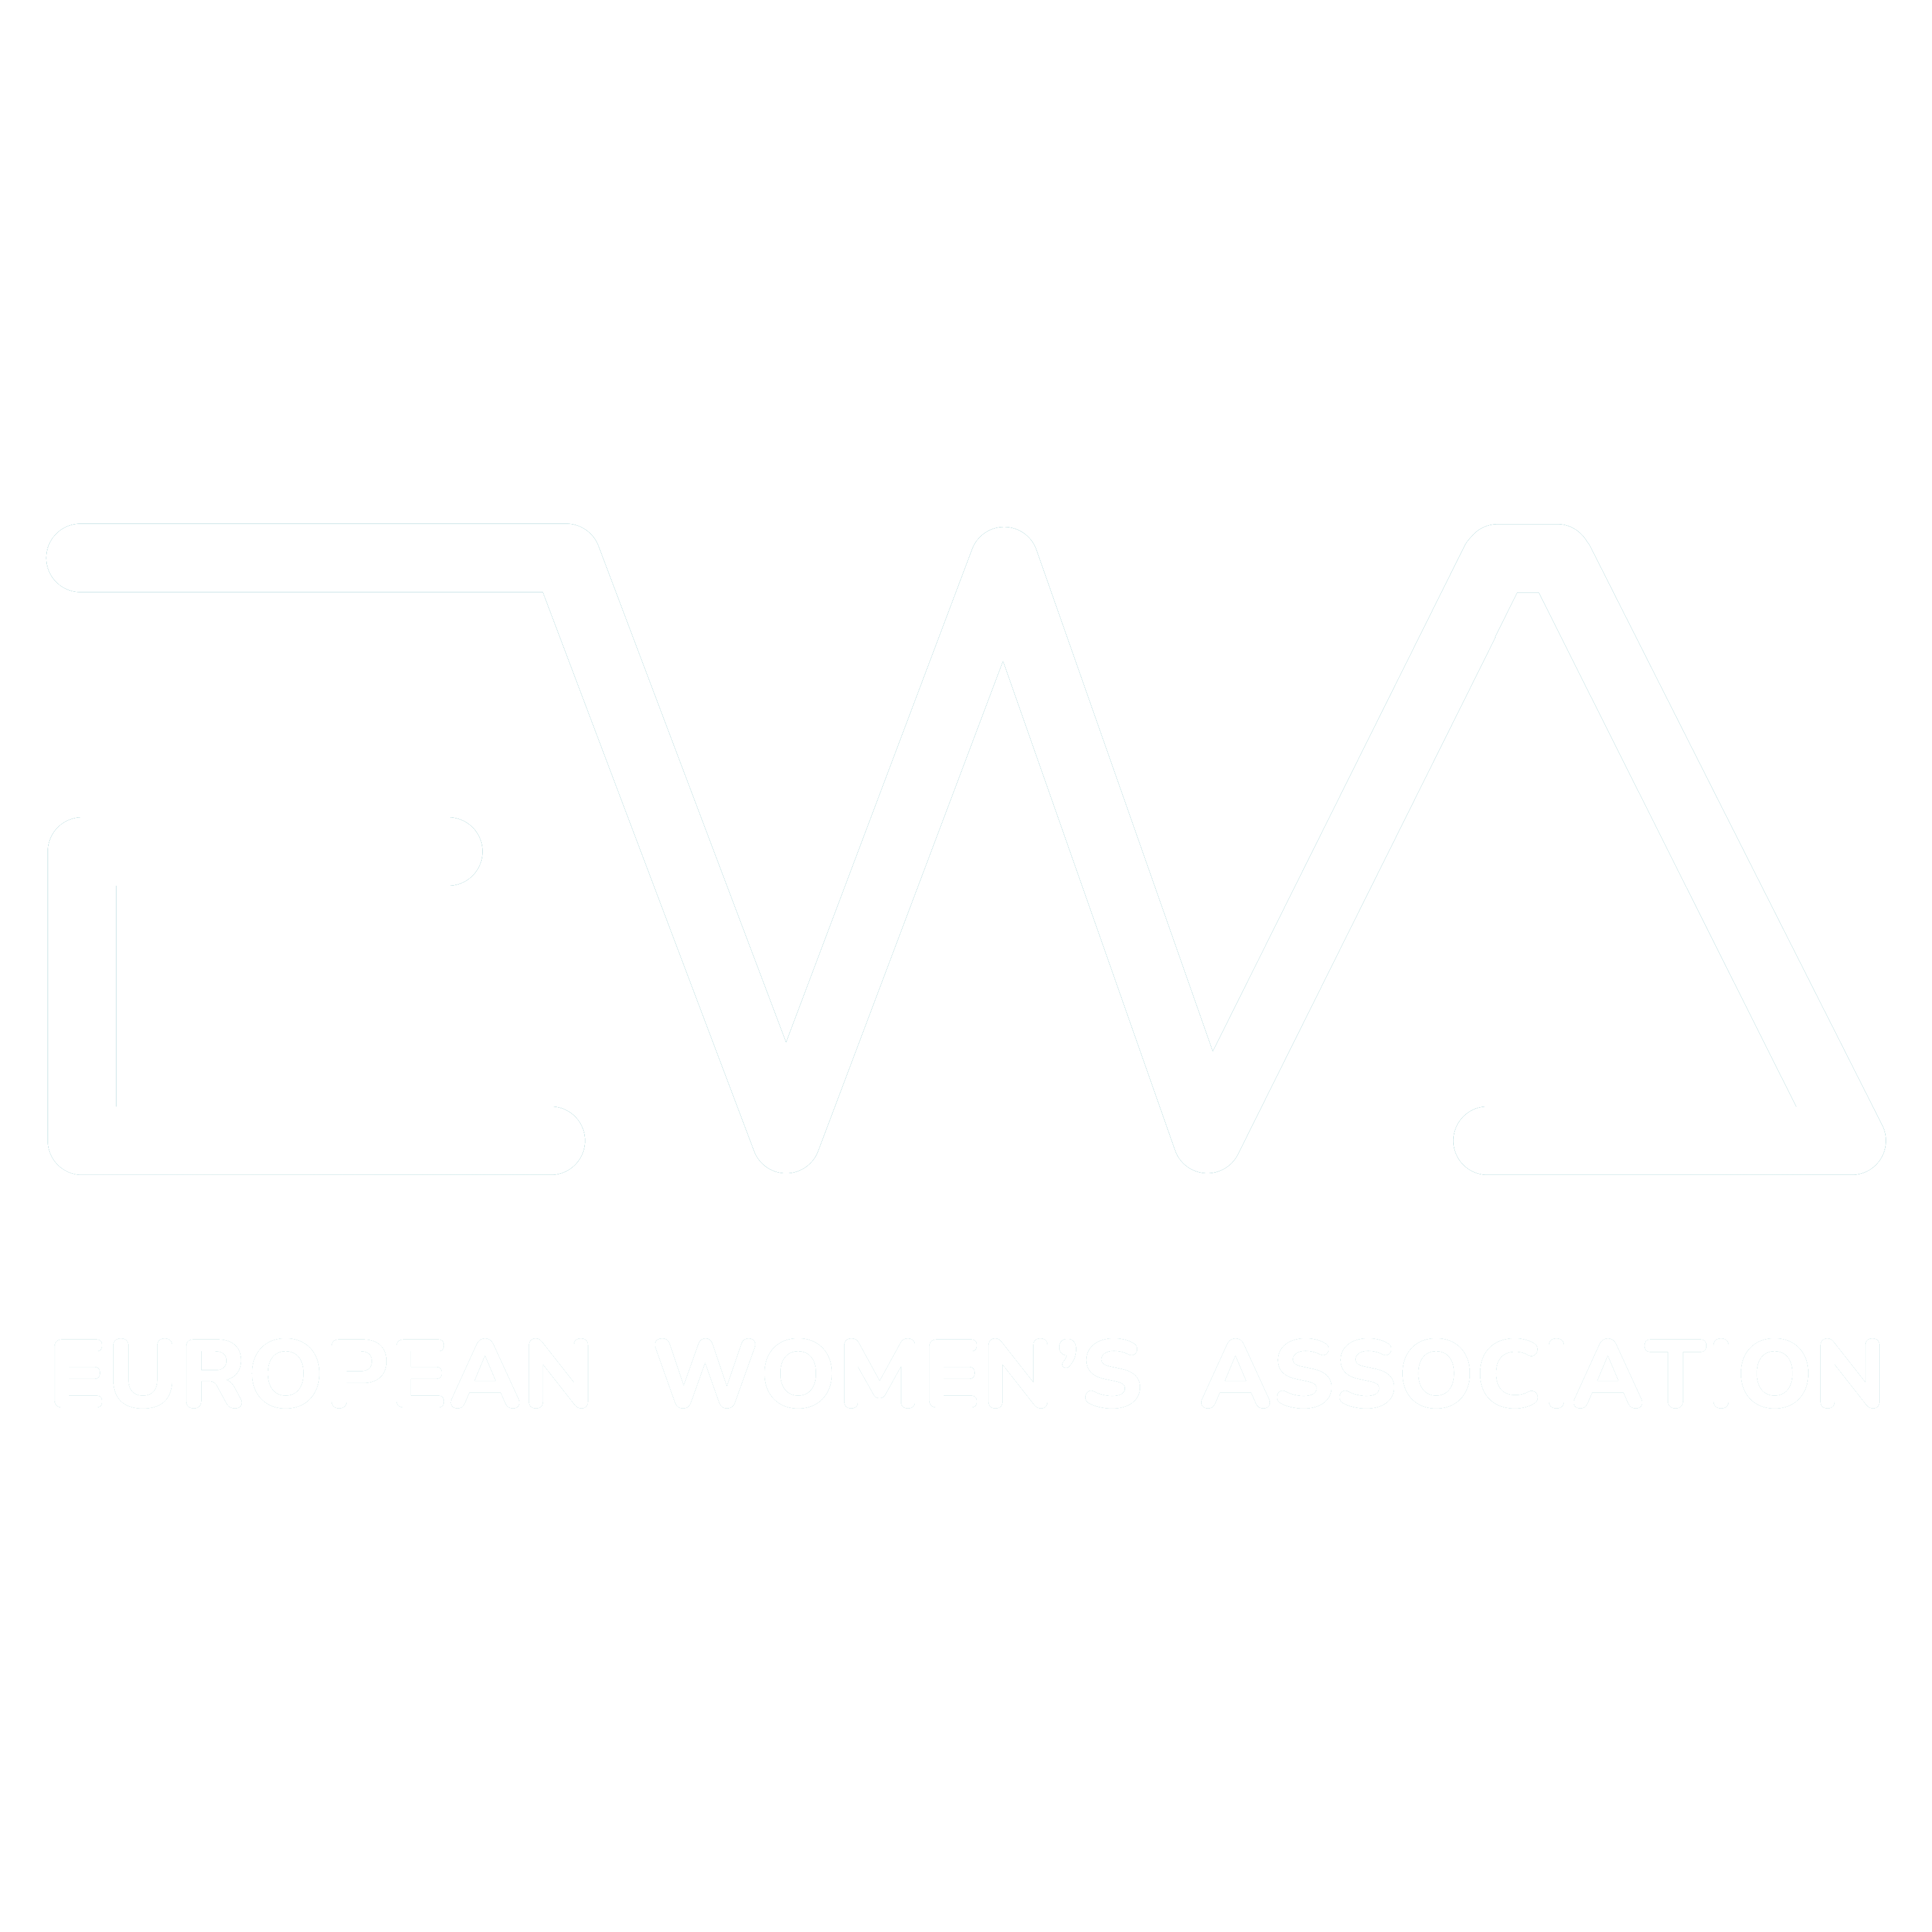 EWA went into partnership with the CEO Clubs Network